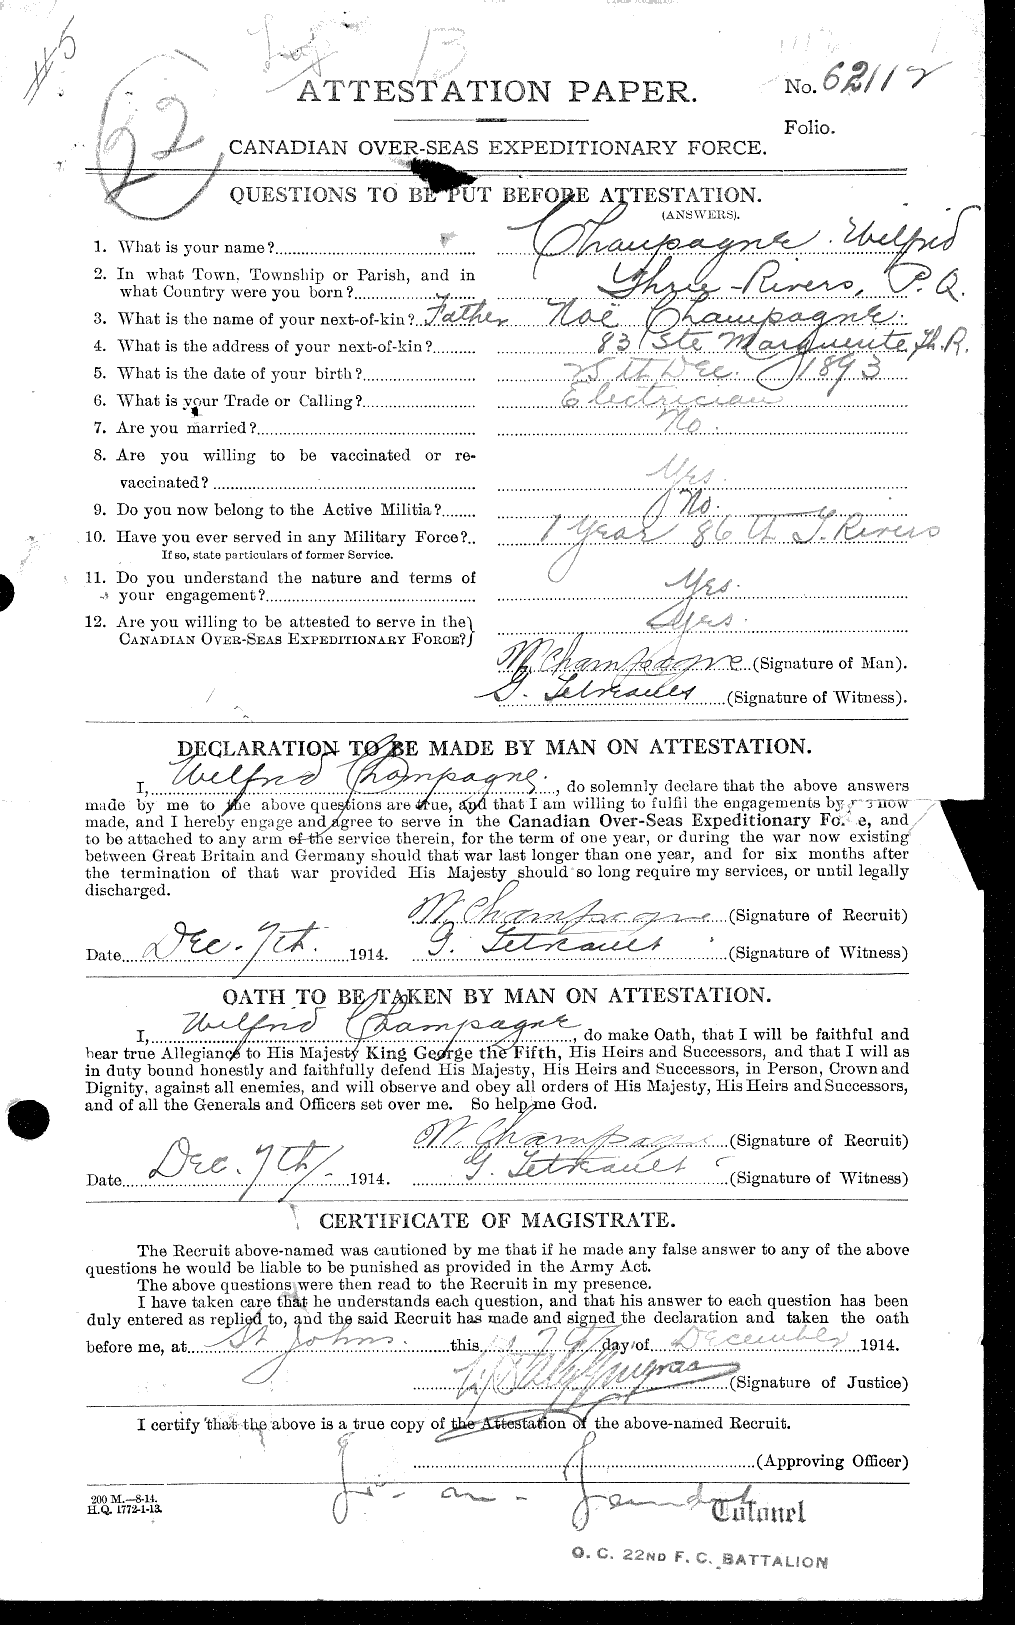 Personnel Records of the First World War - CEF 019768a